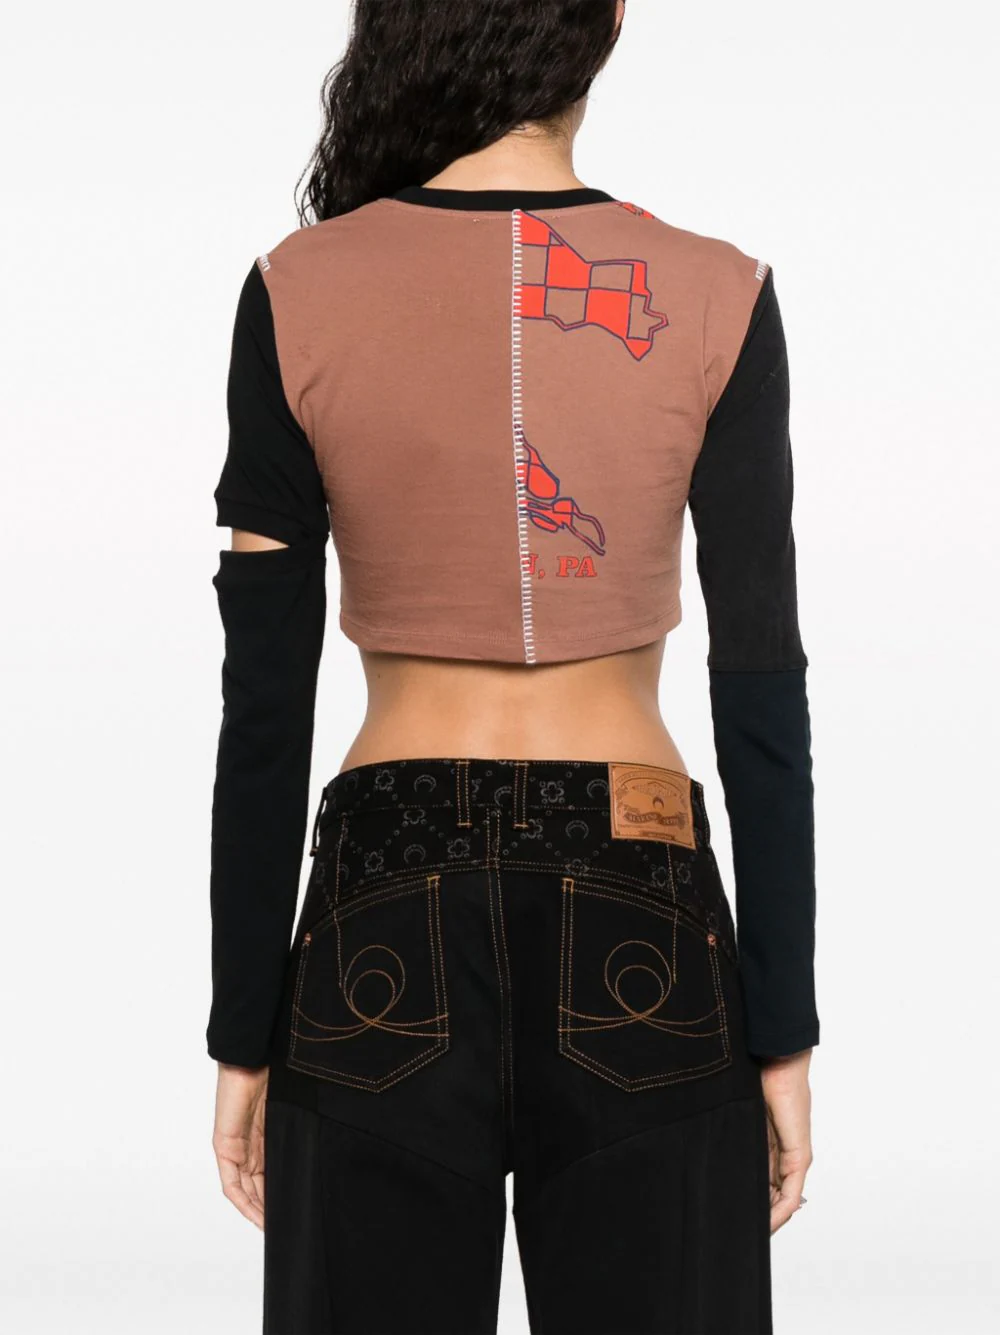 MARINE SERRE Women Regenerated Graphic T-Shirt Patchwork Cropped Top